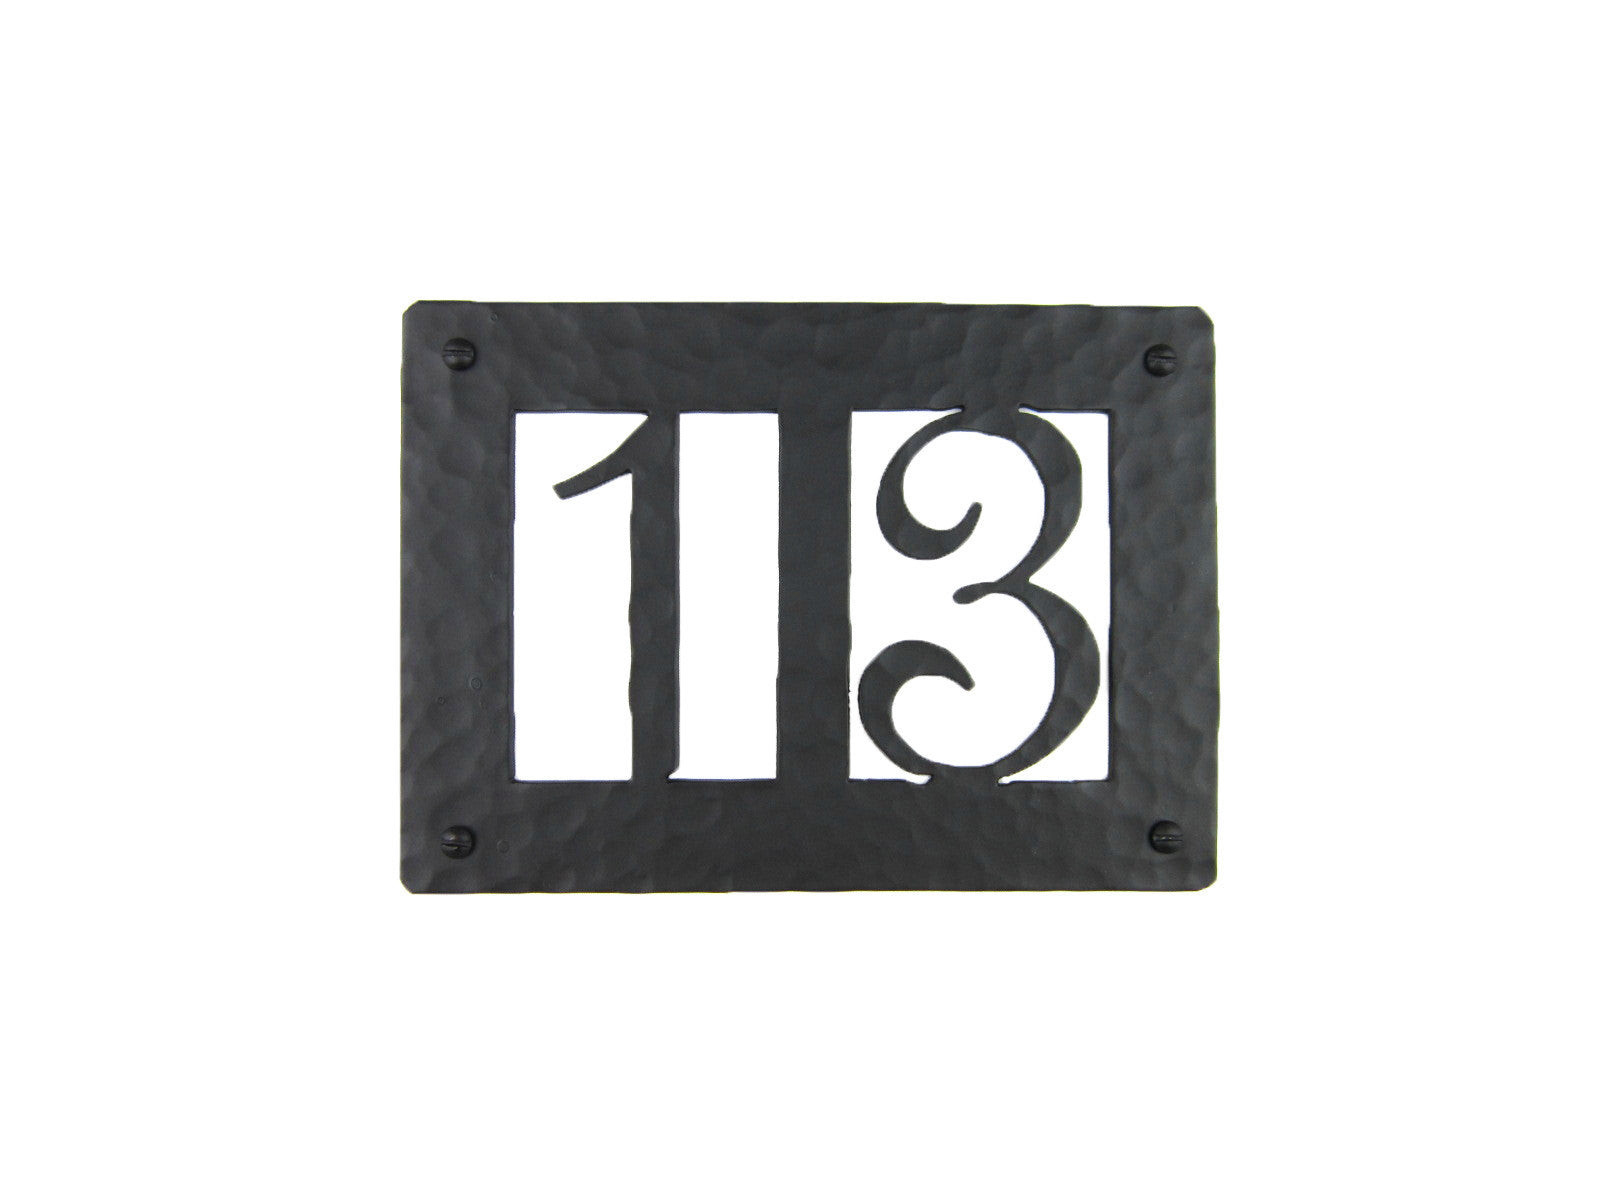 Rustic Hammered Iron Address Plaque Horizontal APH22 (2number)